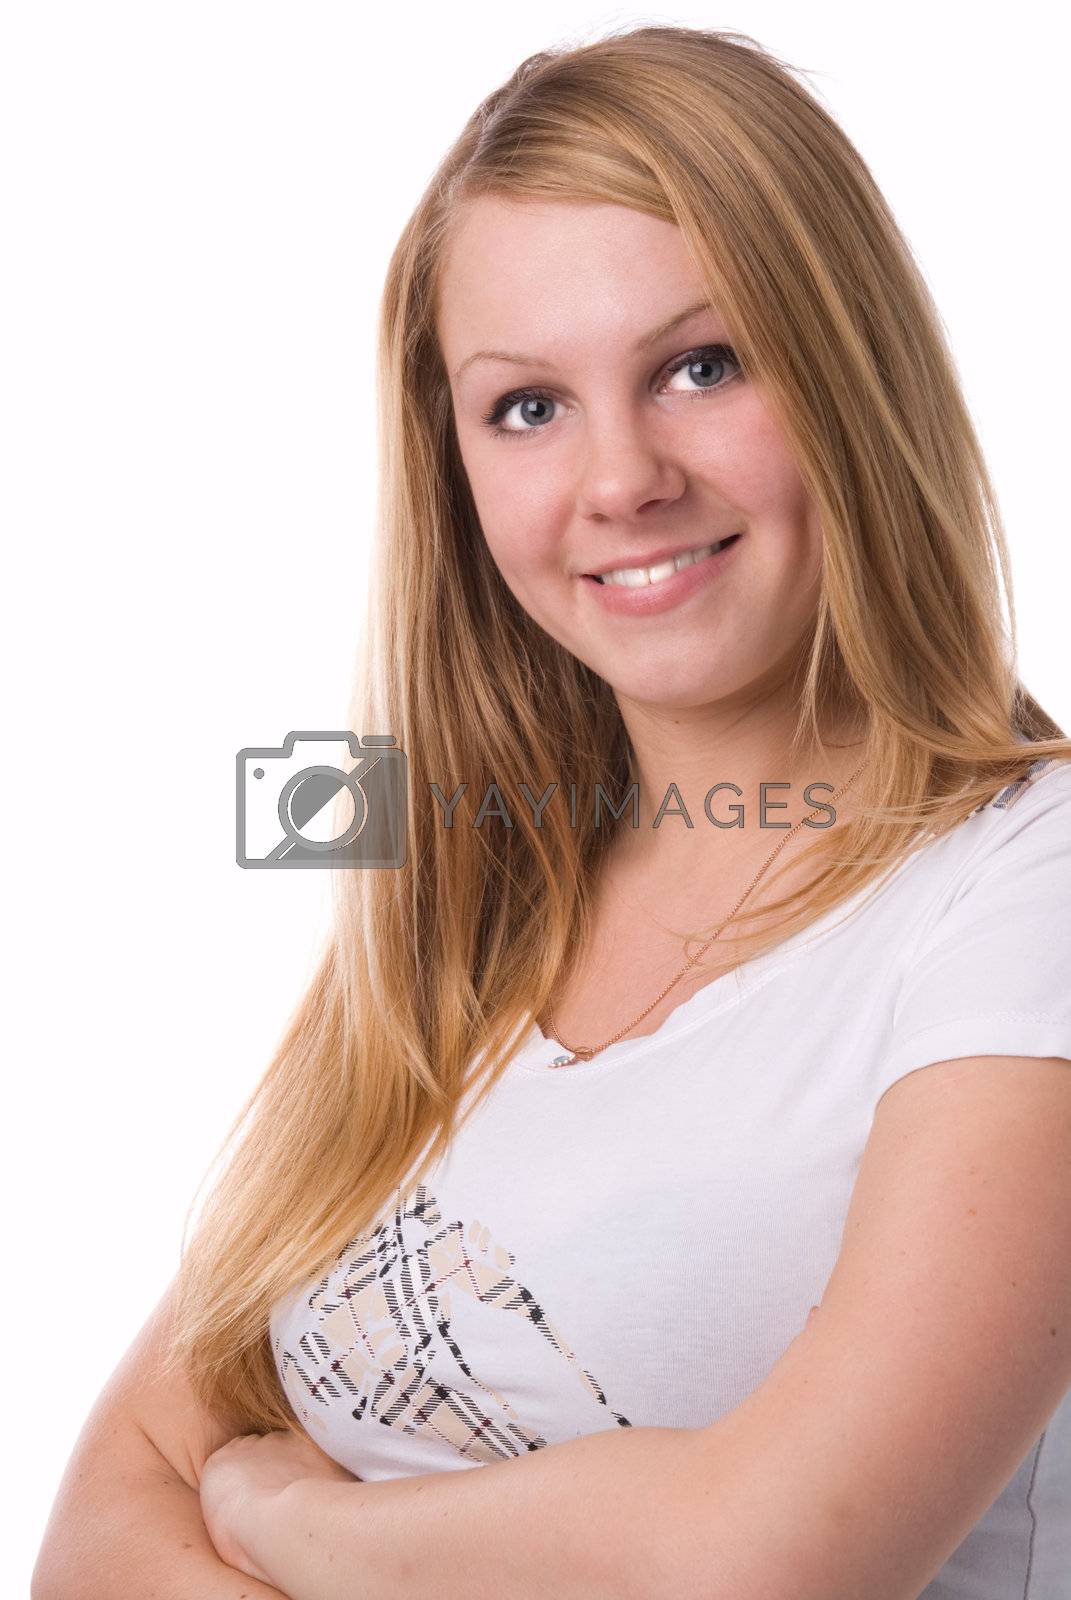 Royalty free image of A smiling blonde on white background in studio. by andyphoto